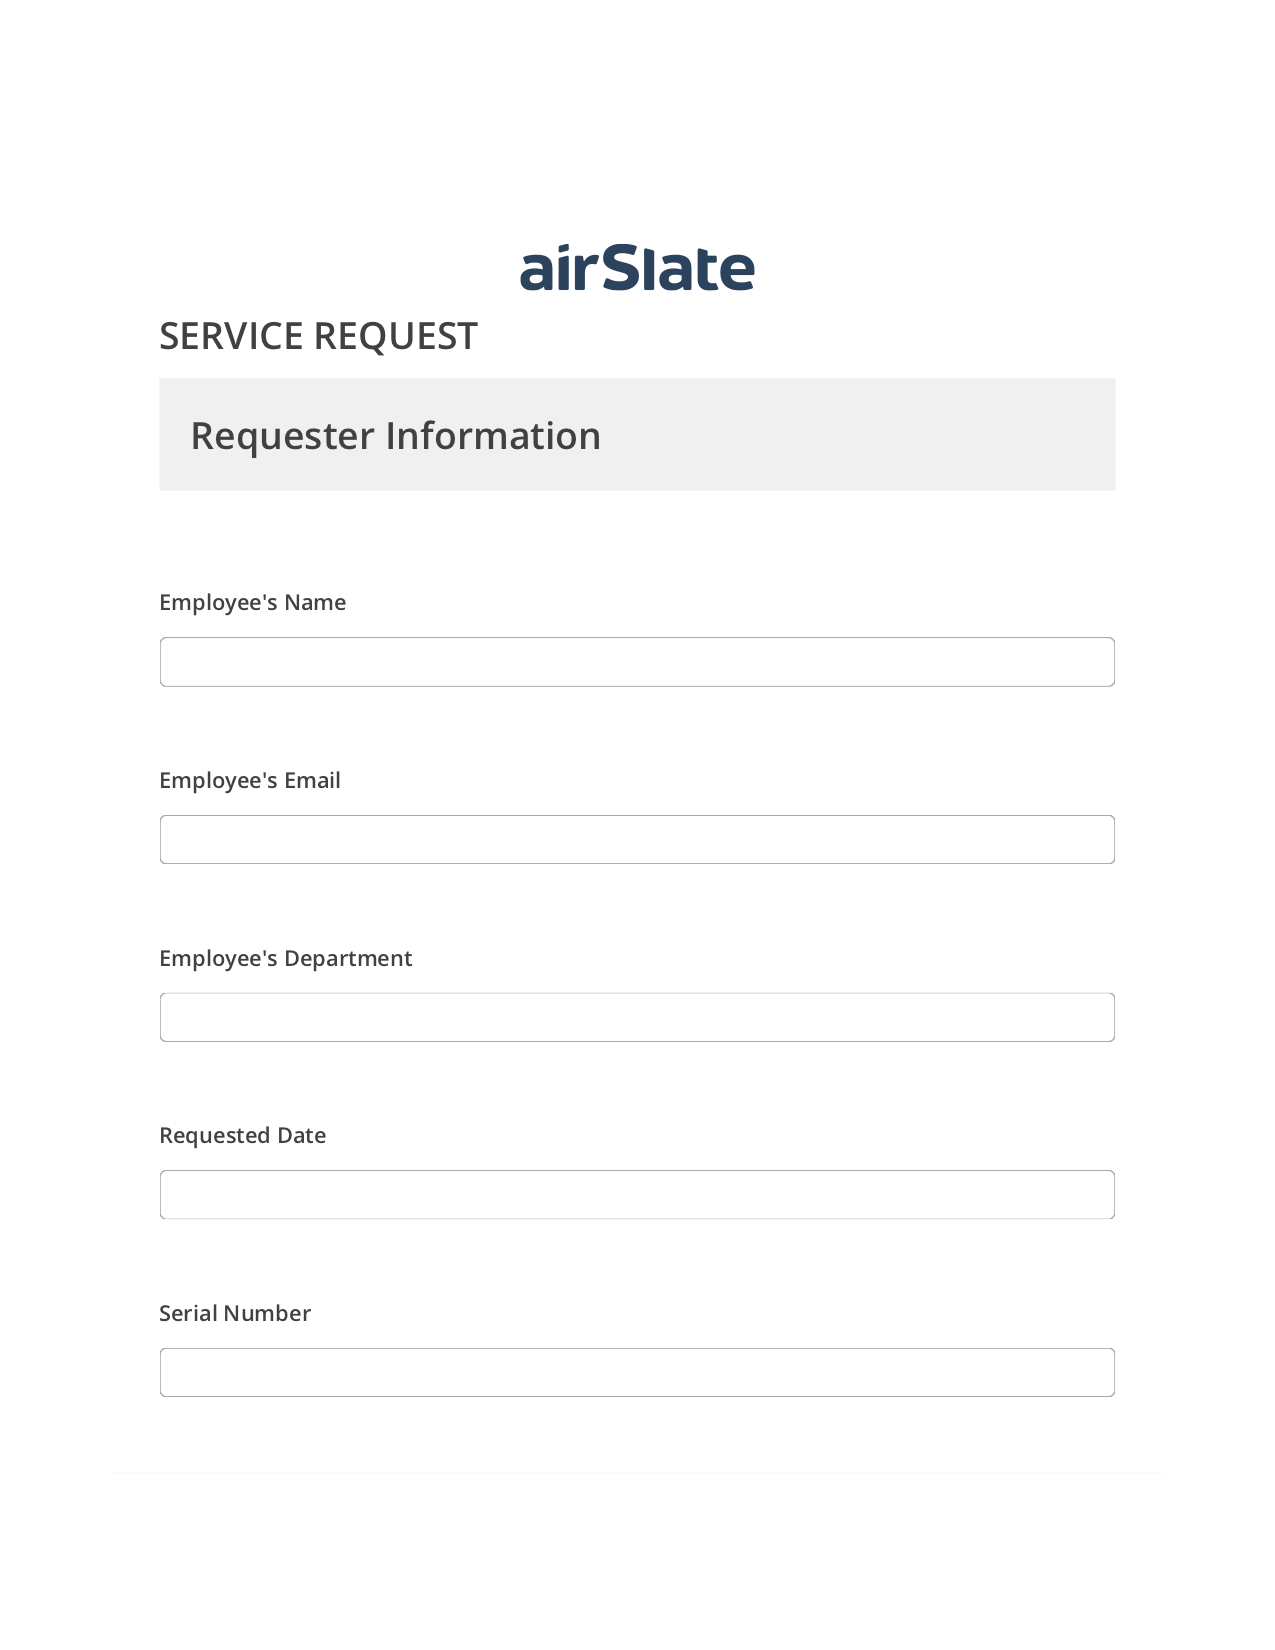 Service Request Details Workflow Pre-fill from CSV File Bot, Text Message Notification Bot, Archive to SharePoint Folder Bot